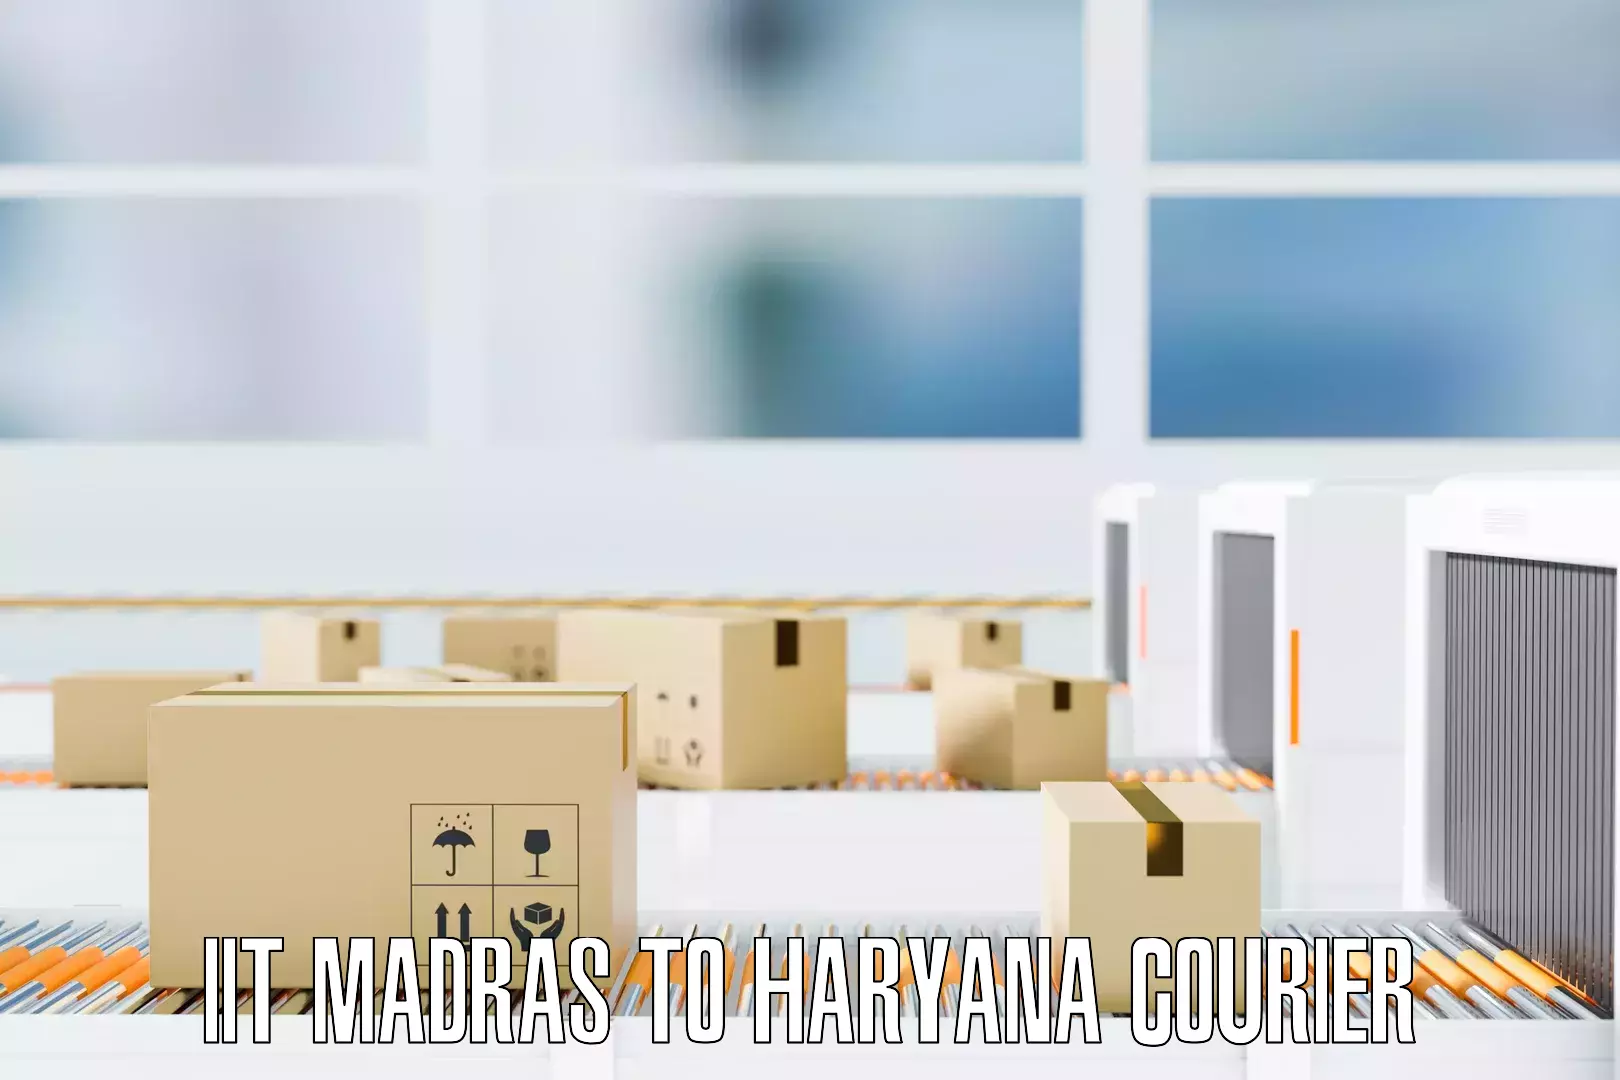 Moving and handling services IIT Madras to Haryana